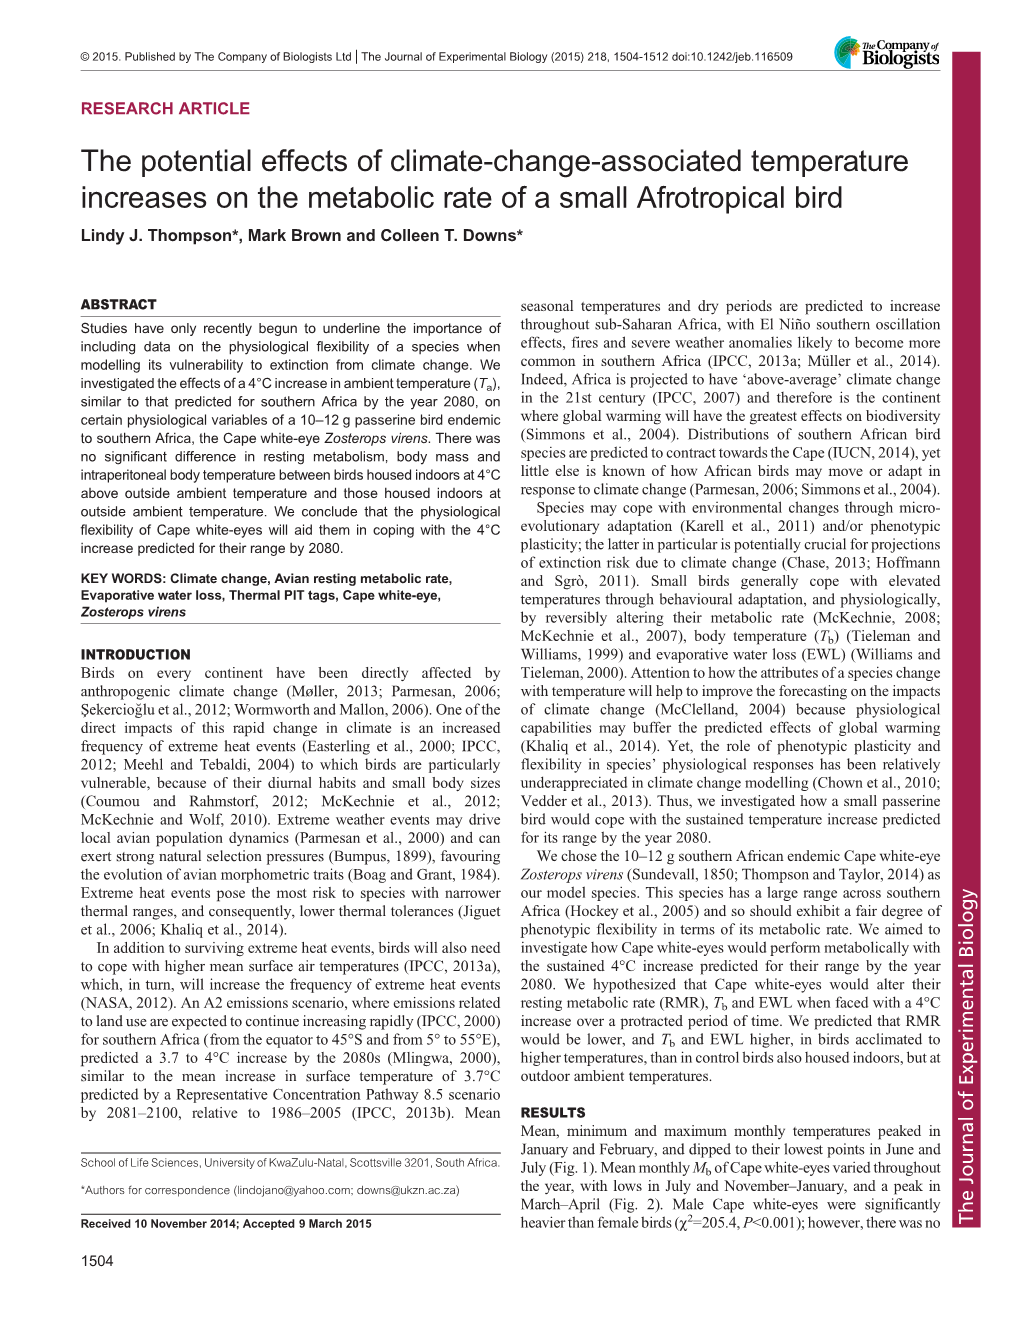 The Potential Effects of Climate-Change-Associated Temperature Increases on the Metabolic Rate of a Small Afrotropical Bird Lindy J